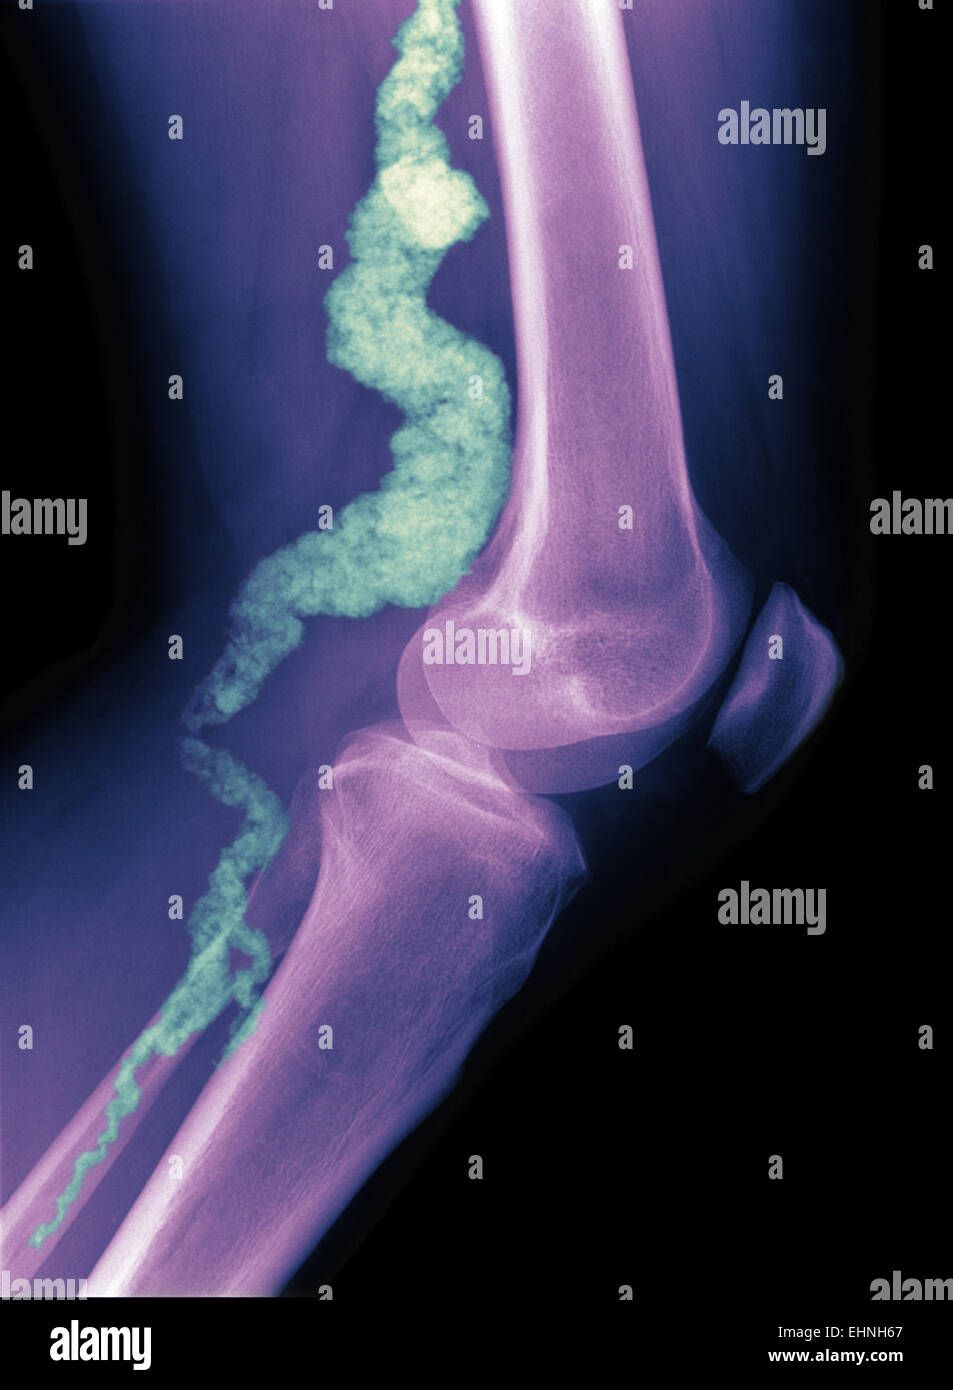 A knee x-ray of a patient with ACDC, a rare calcification disorder, reveals calcification in the main artery supplying blood to the lower leg. Stock Photo